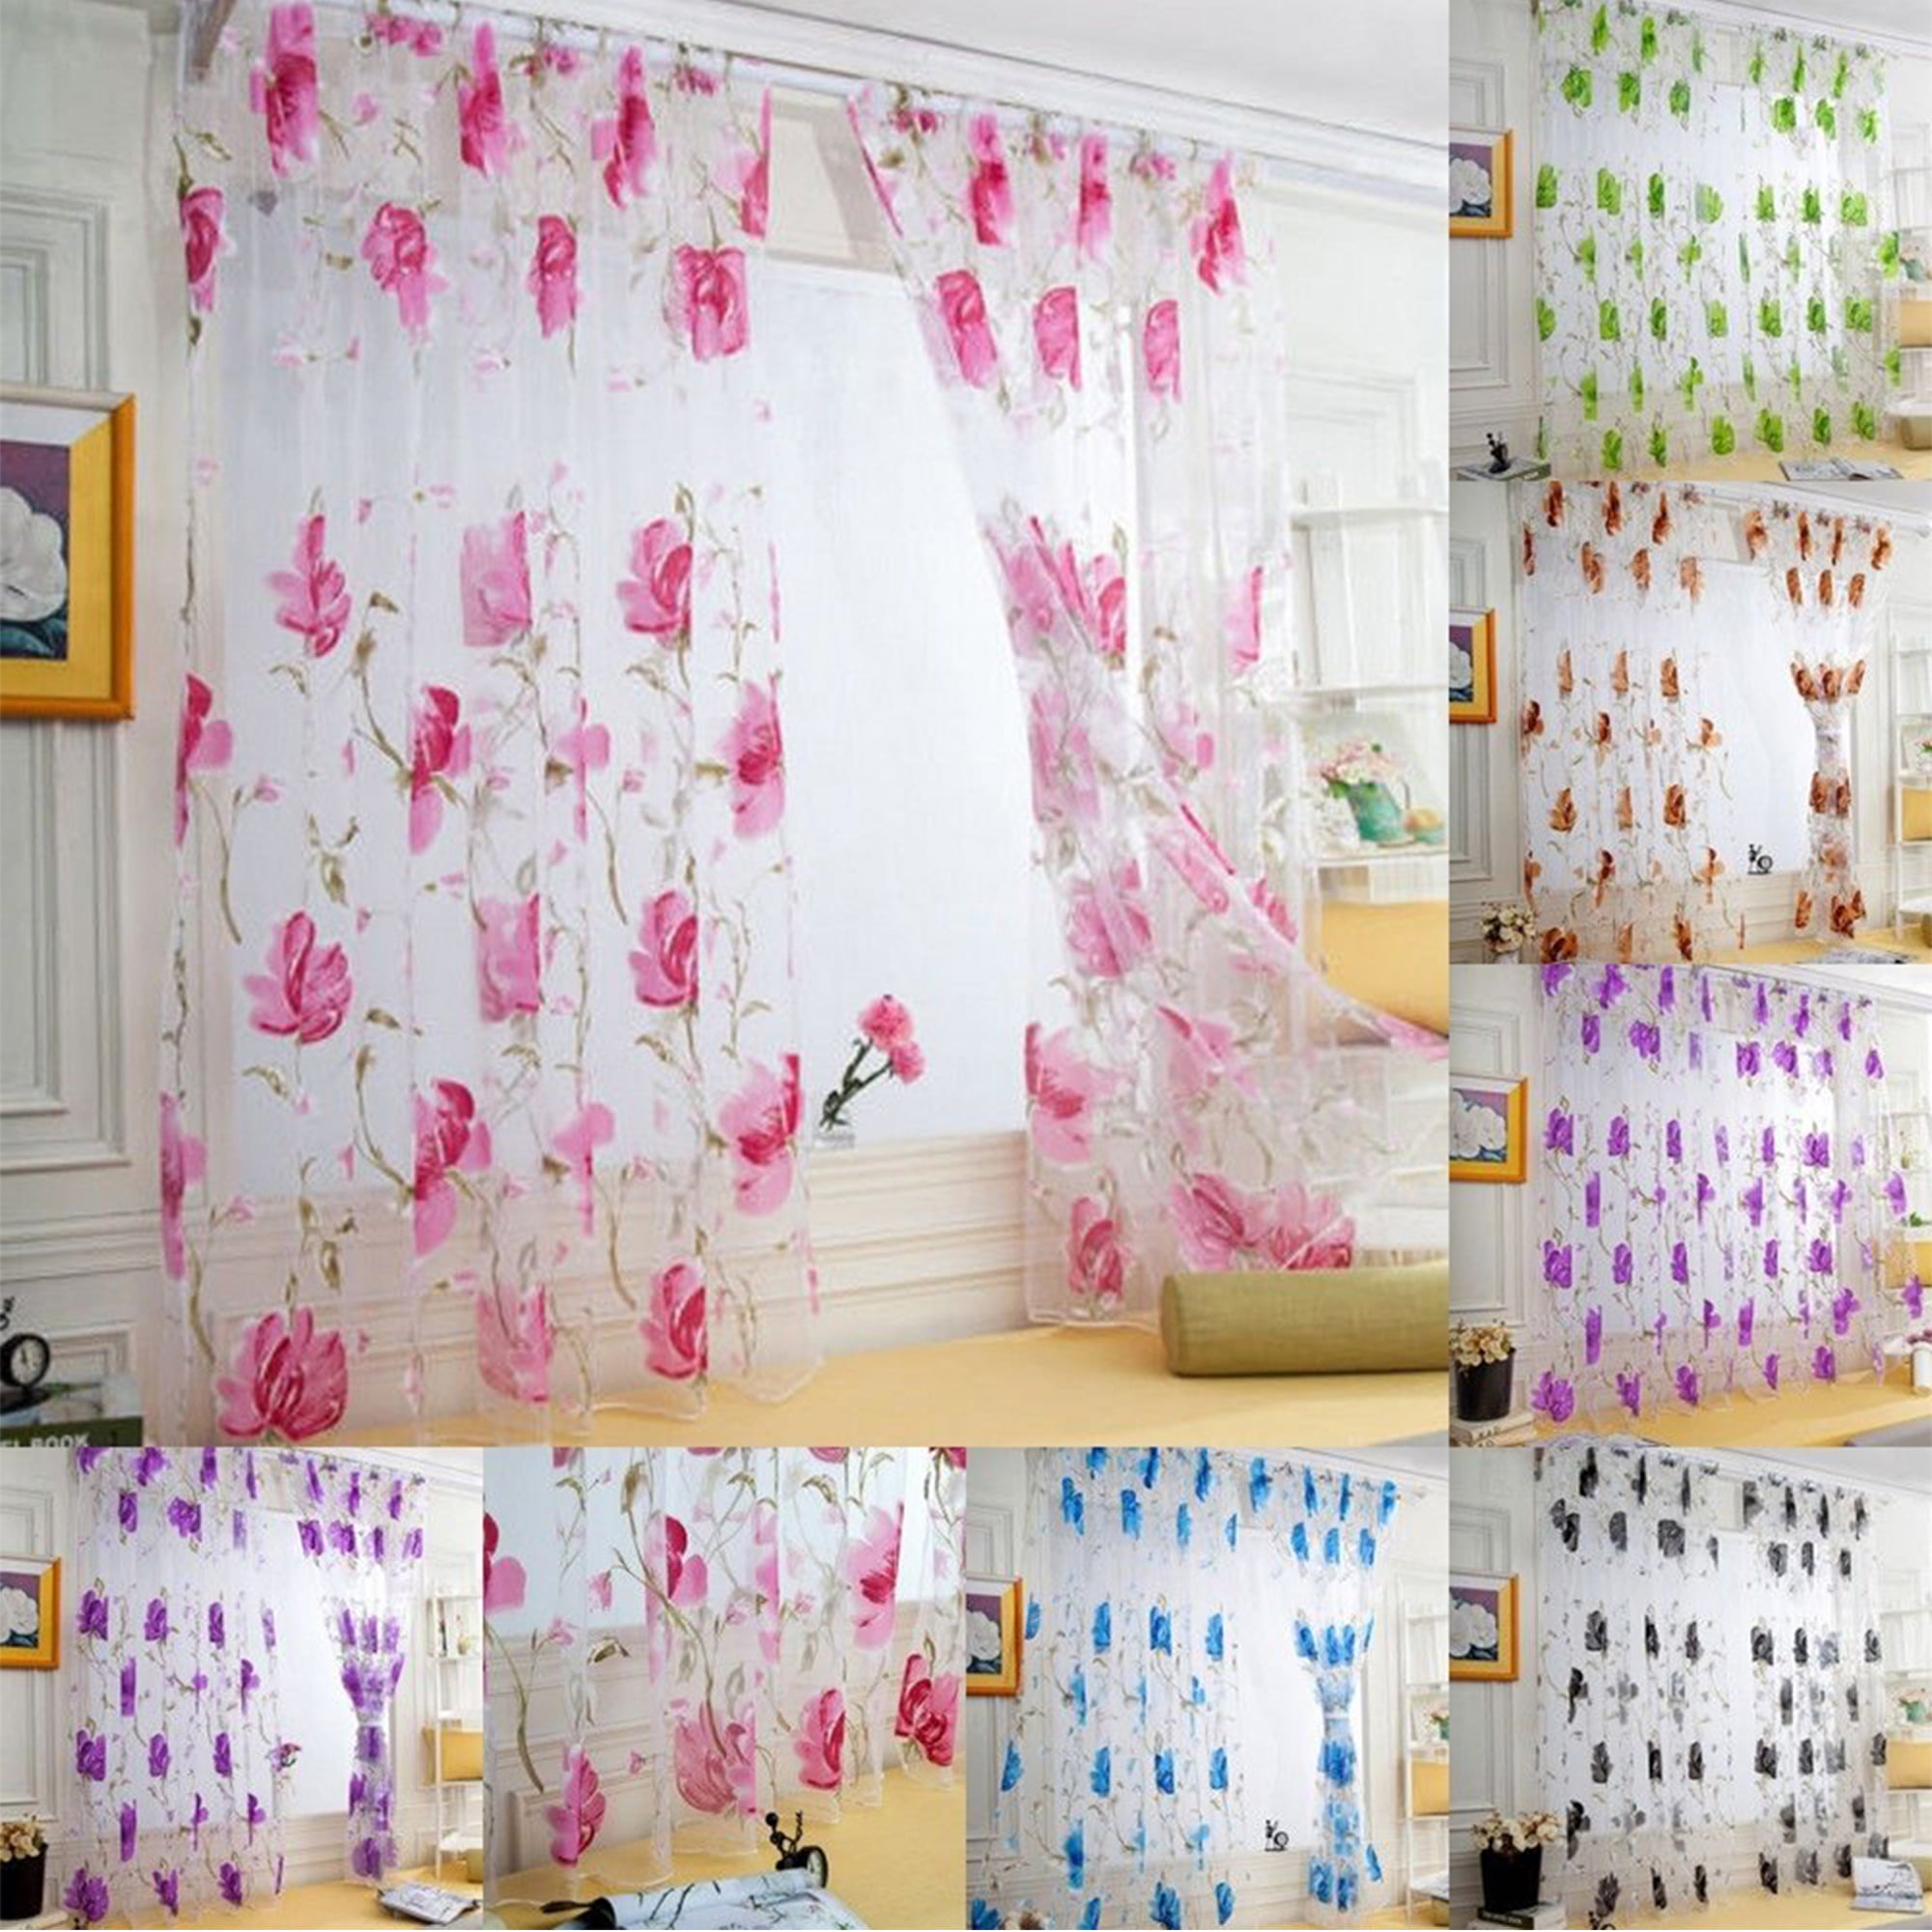 Coloful Floral Tulle Voile Door Window Curtain Drape Panel Sheer Scarf Divider